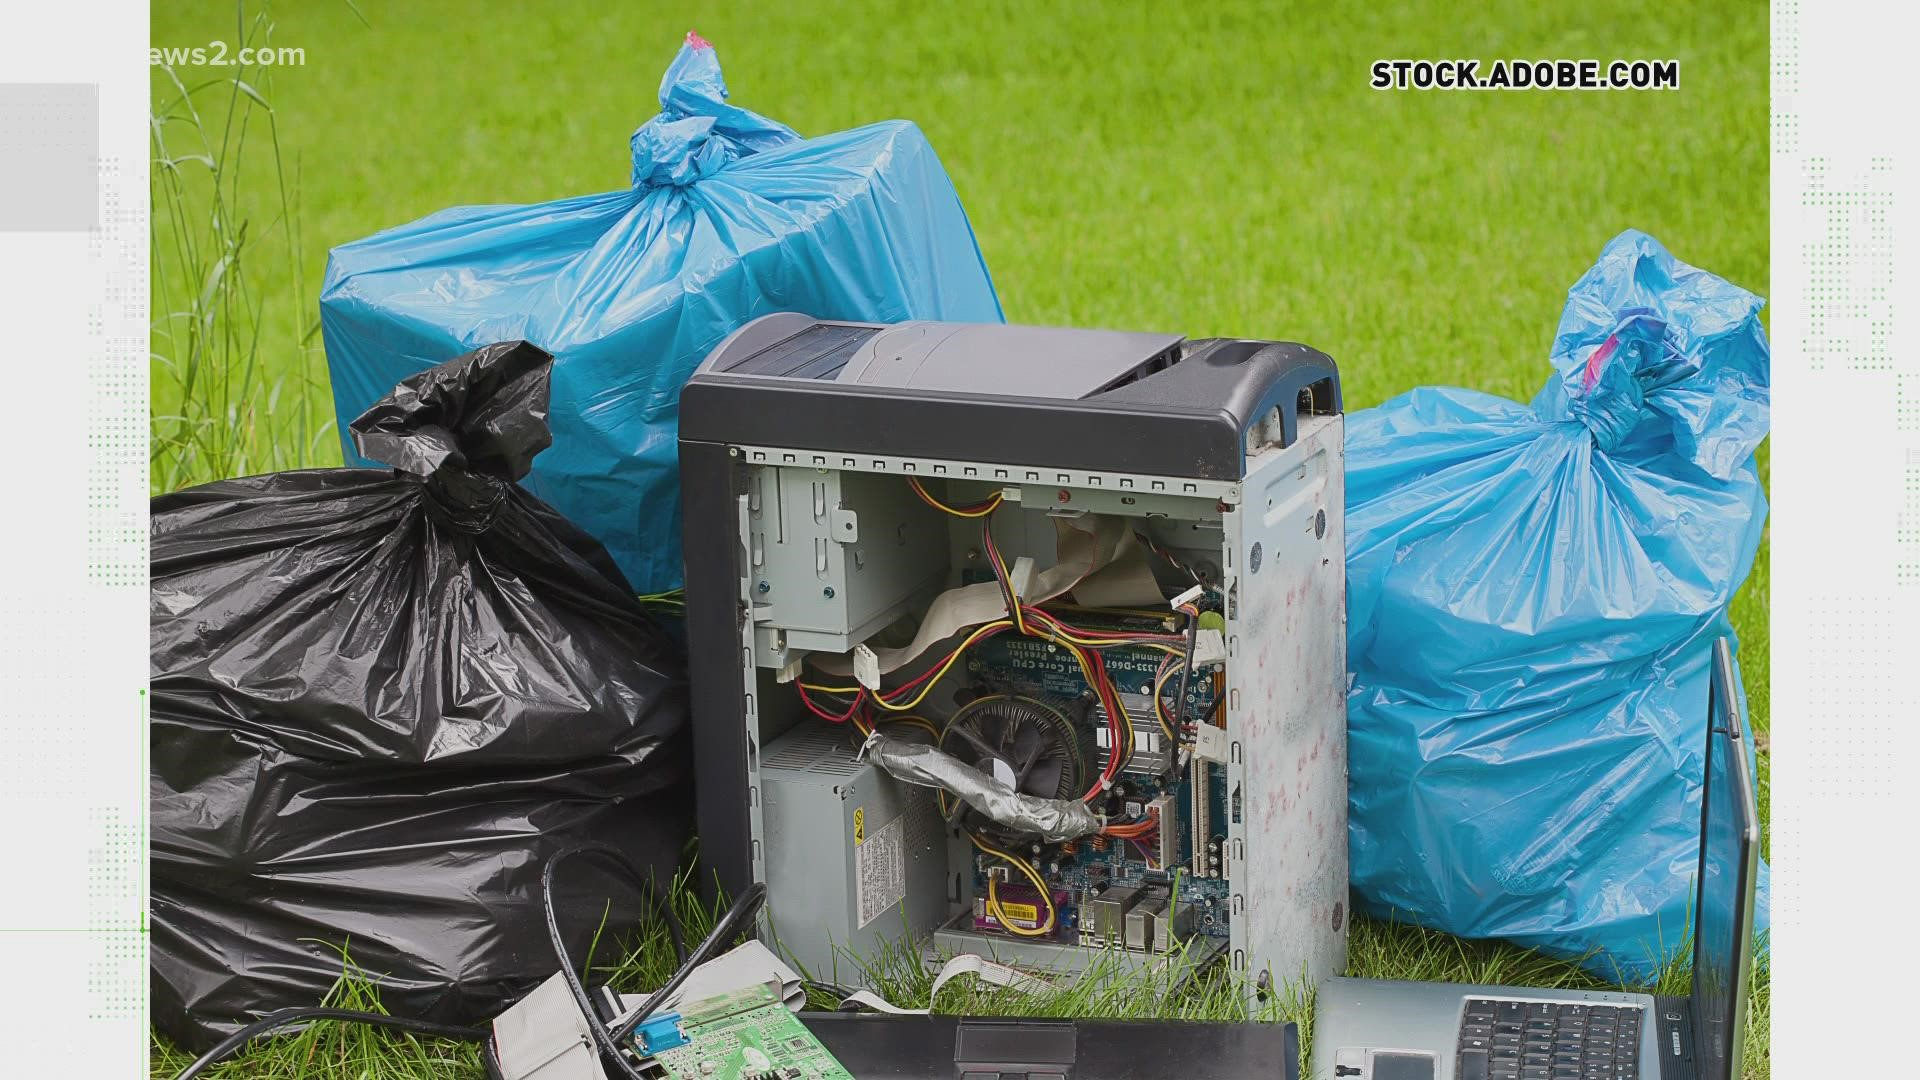 Half of states, including NC, have recycling laws preventing electronics from ending up in landfills.